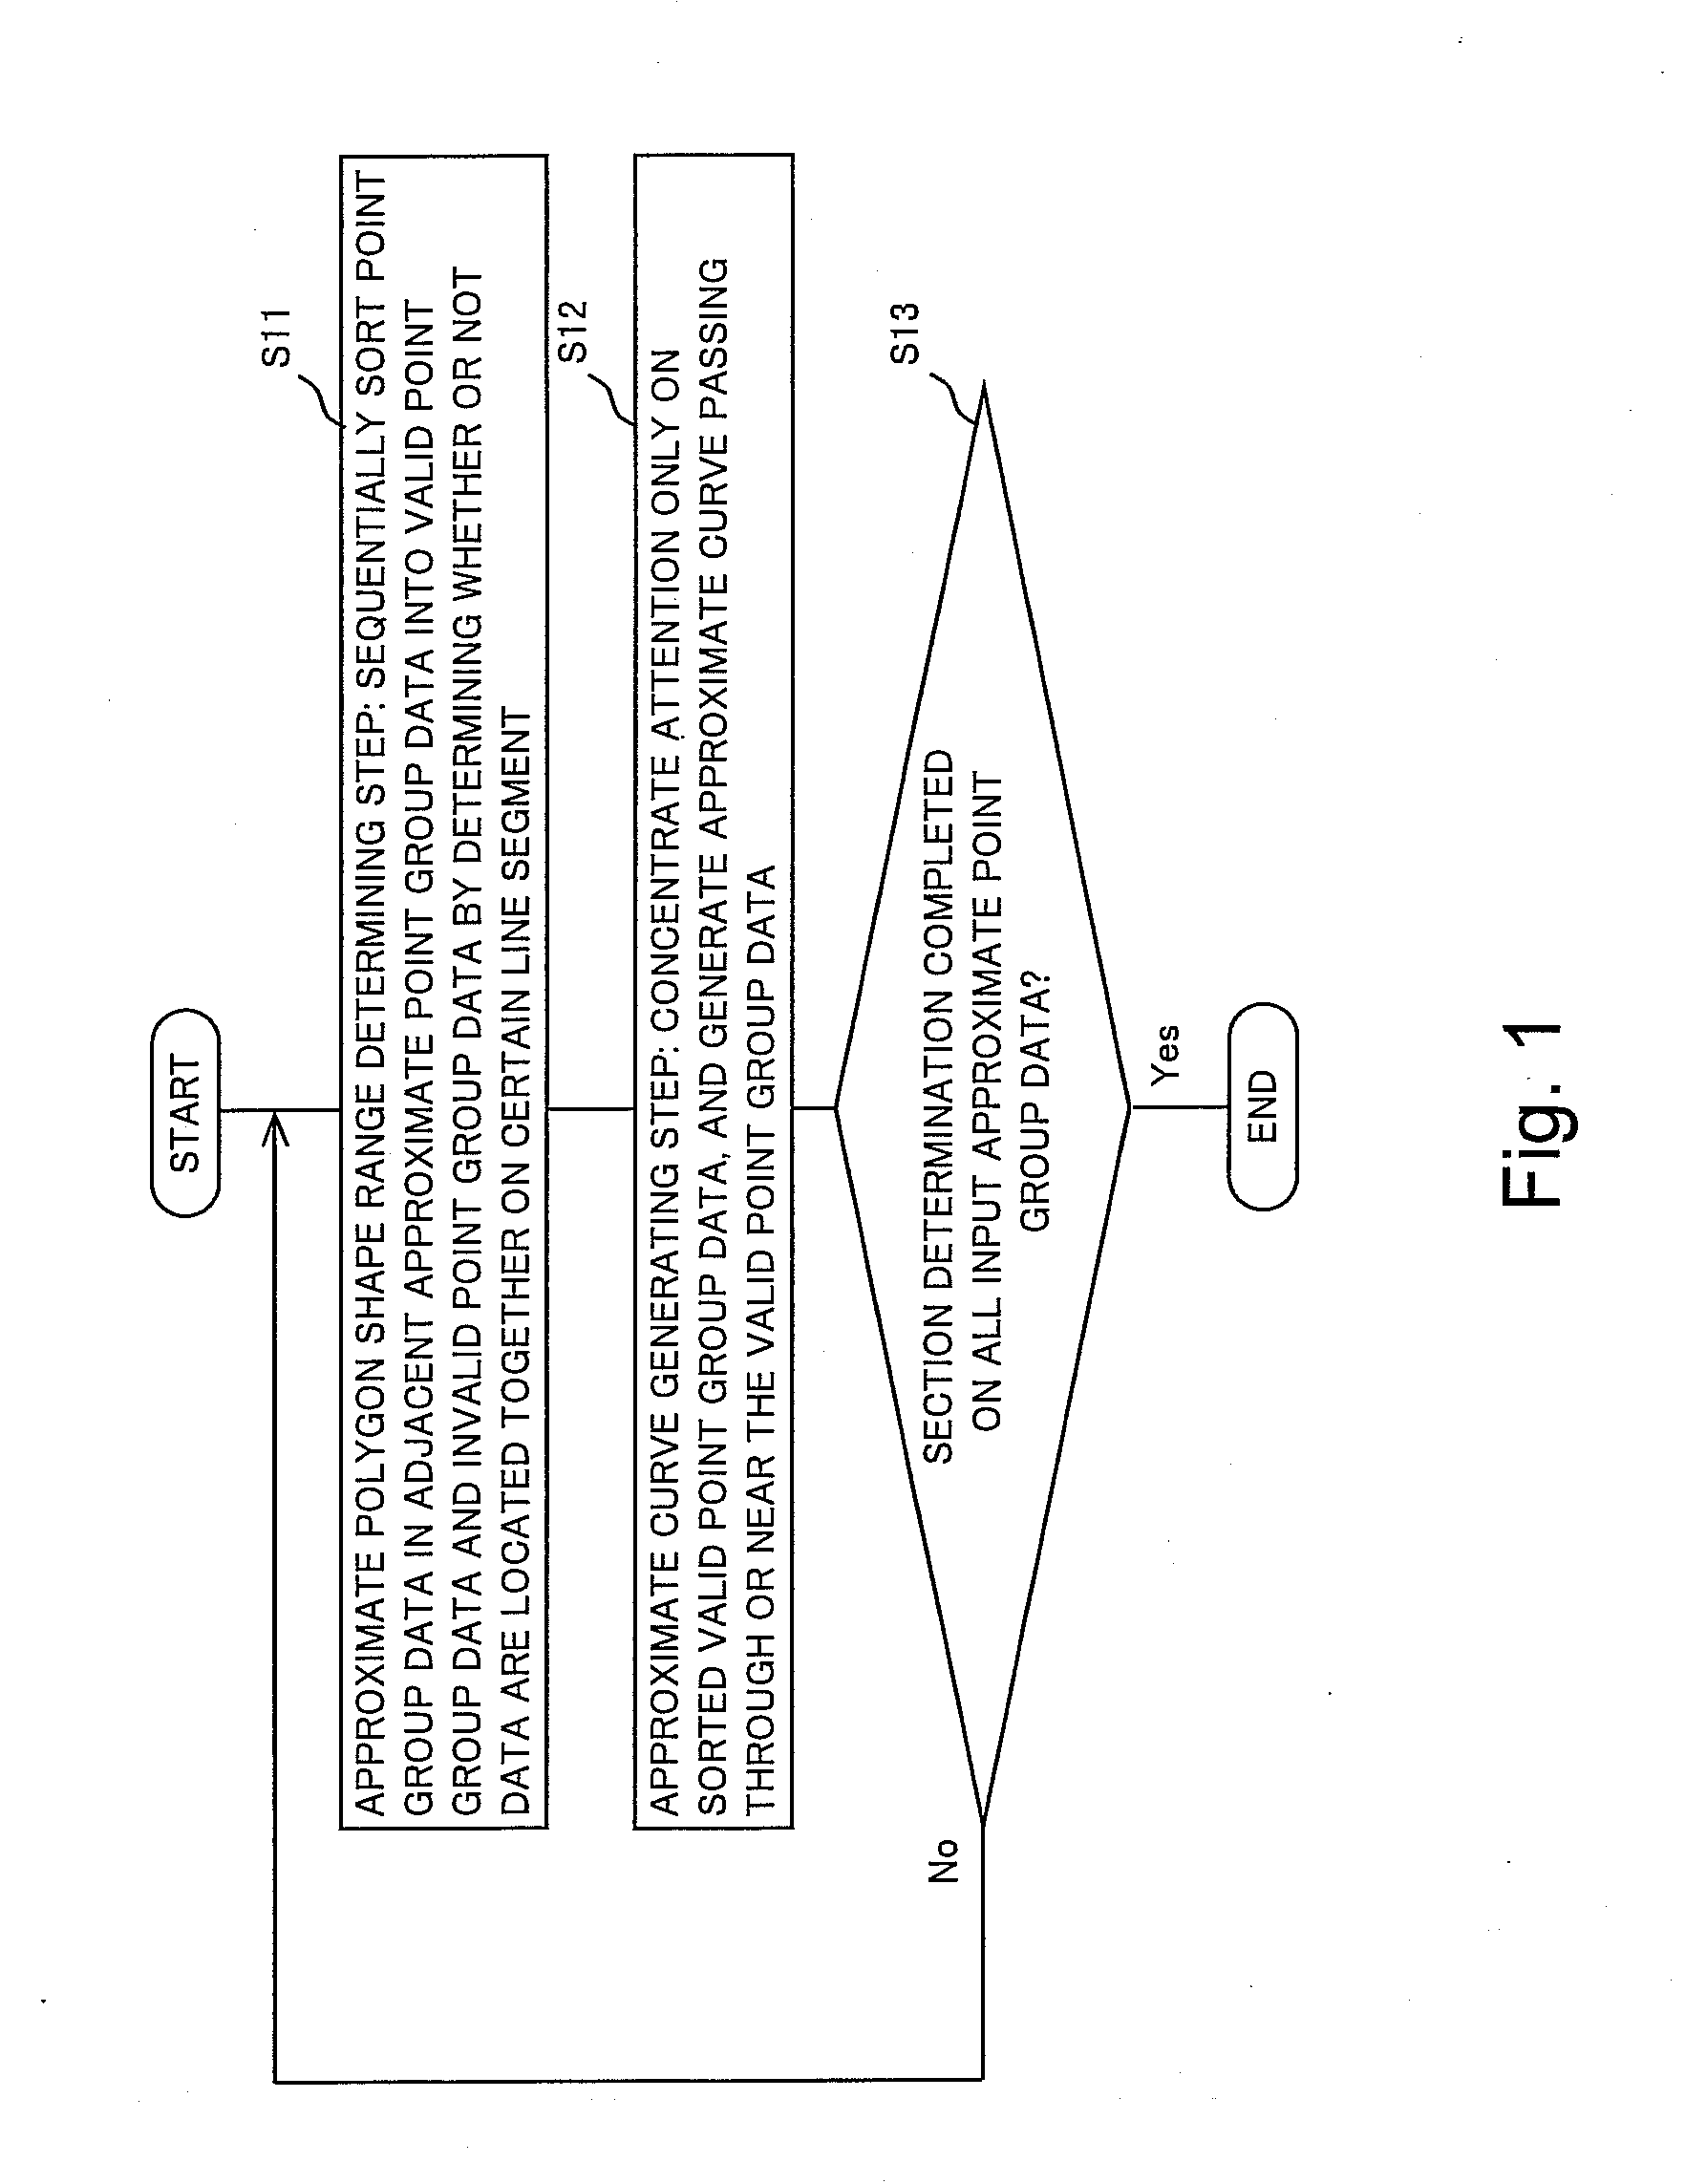 Program and method for generating approximate curve from approximate point group data